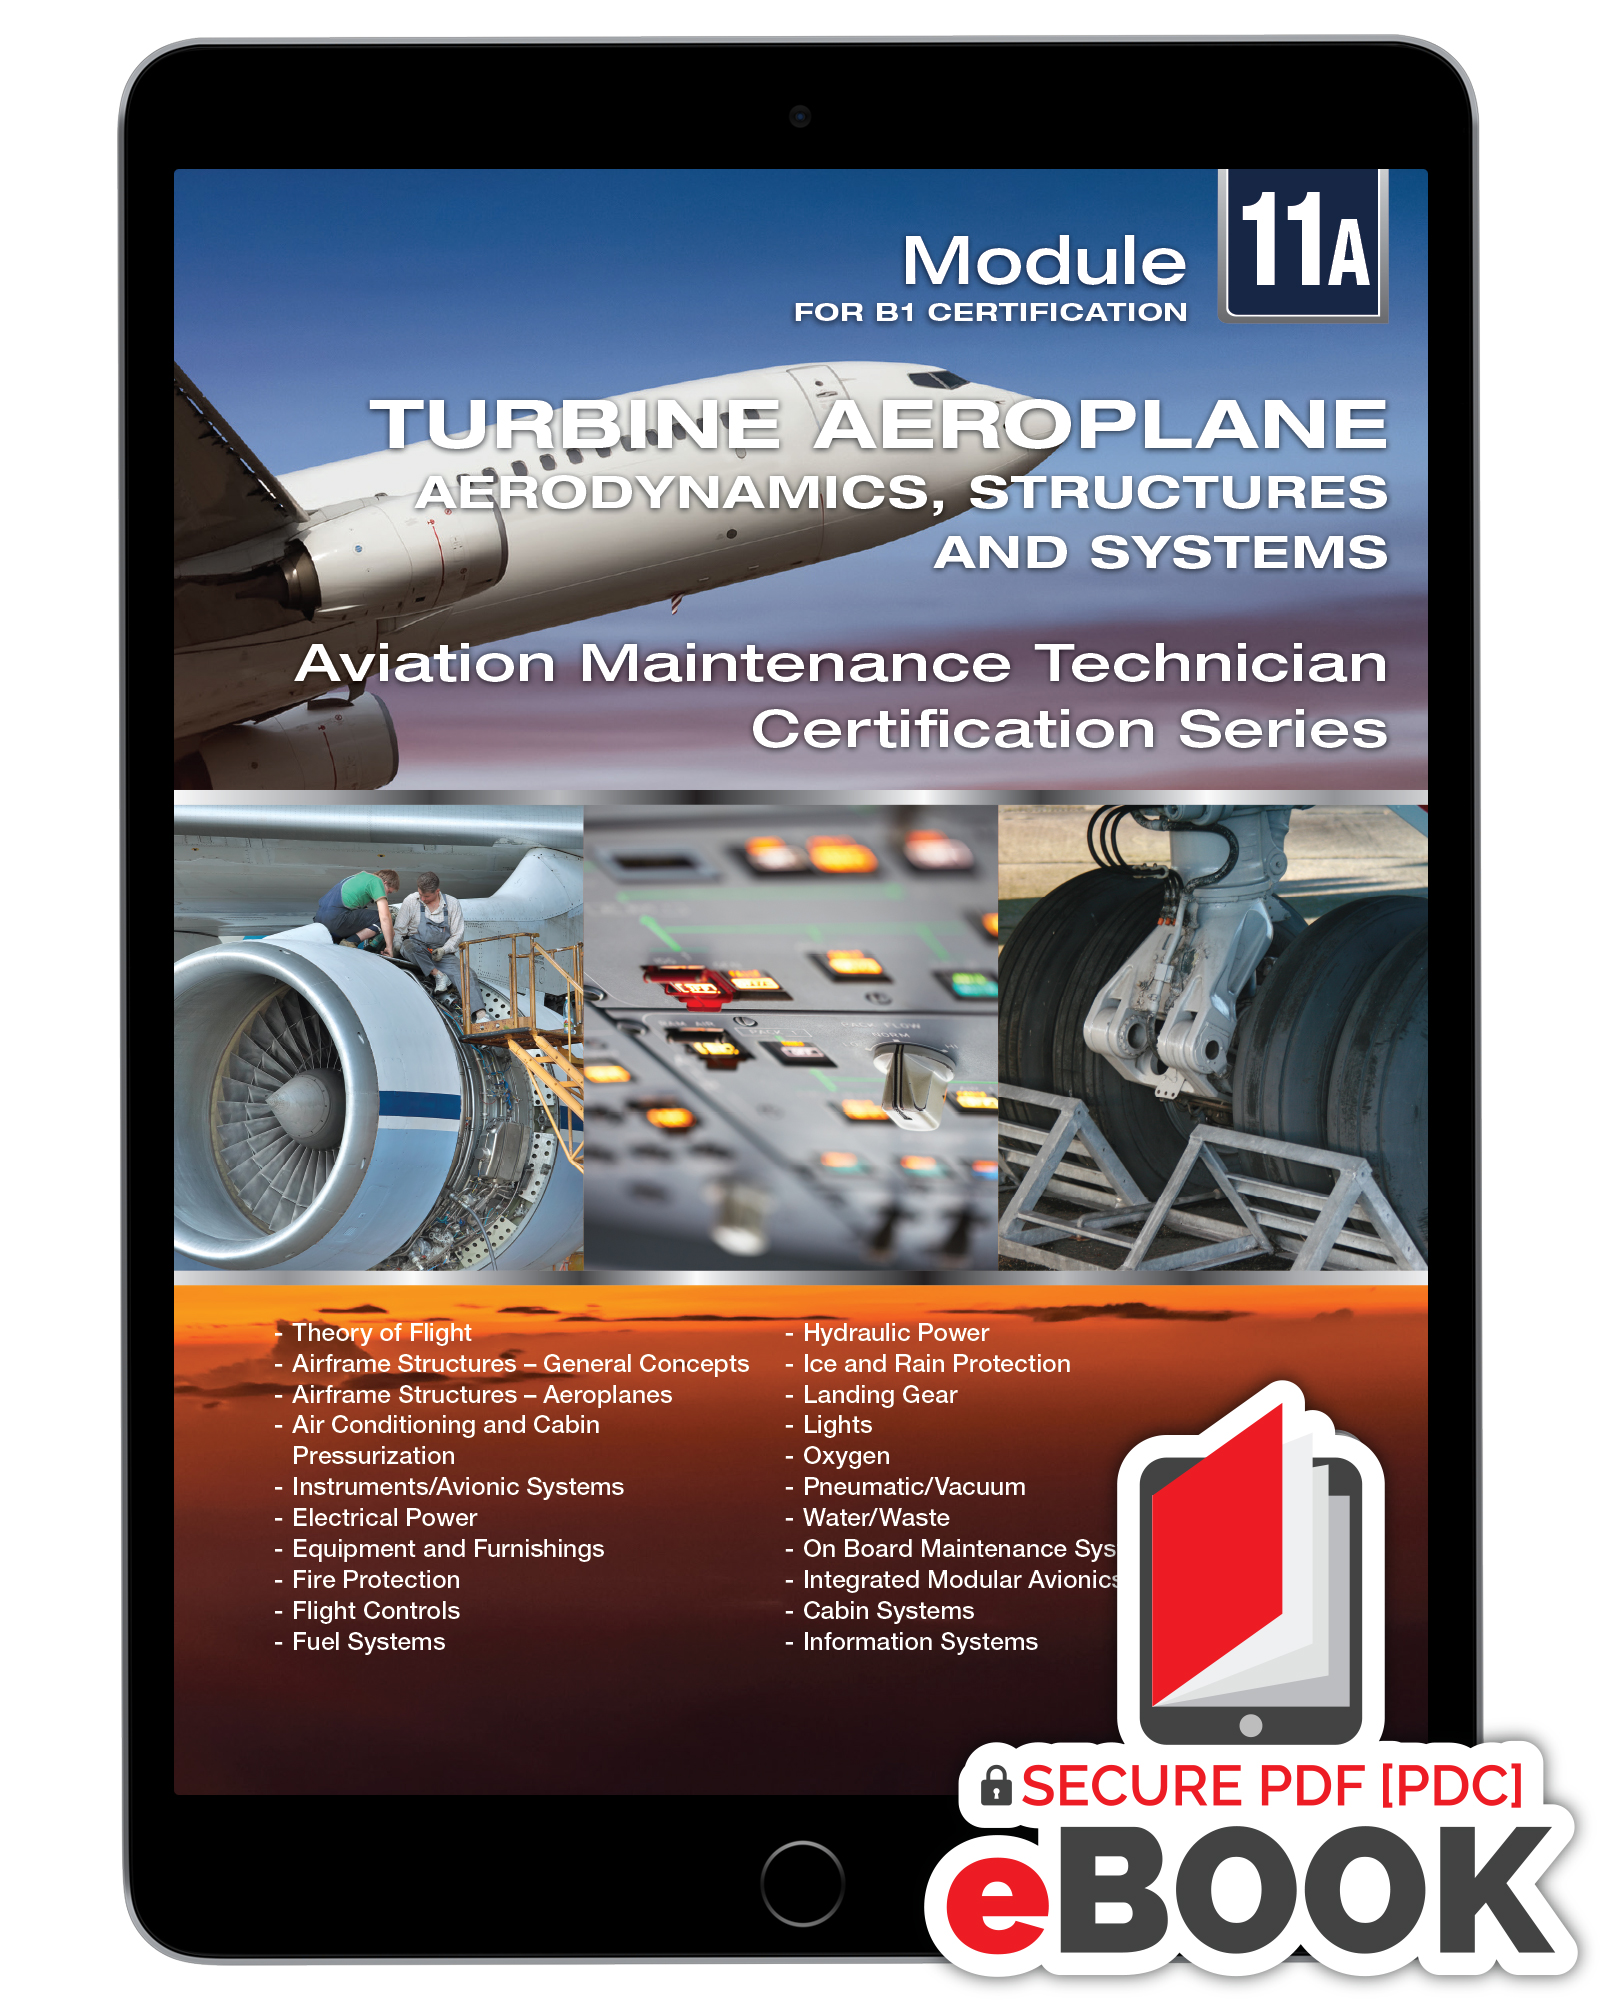 Turbine Aeroplane Structures and Systems: Module 11A (B1) - eBook 